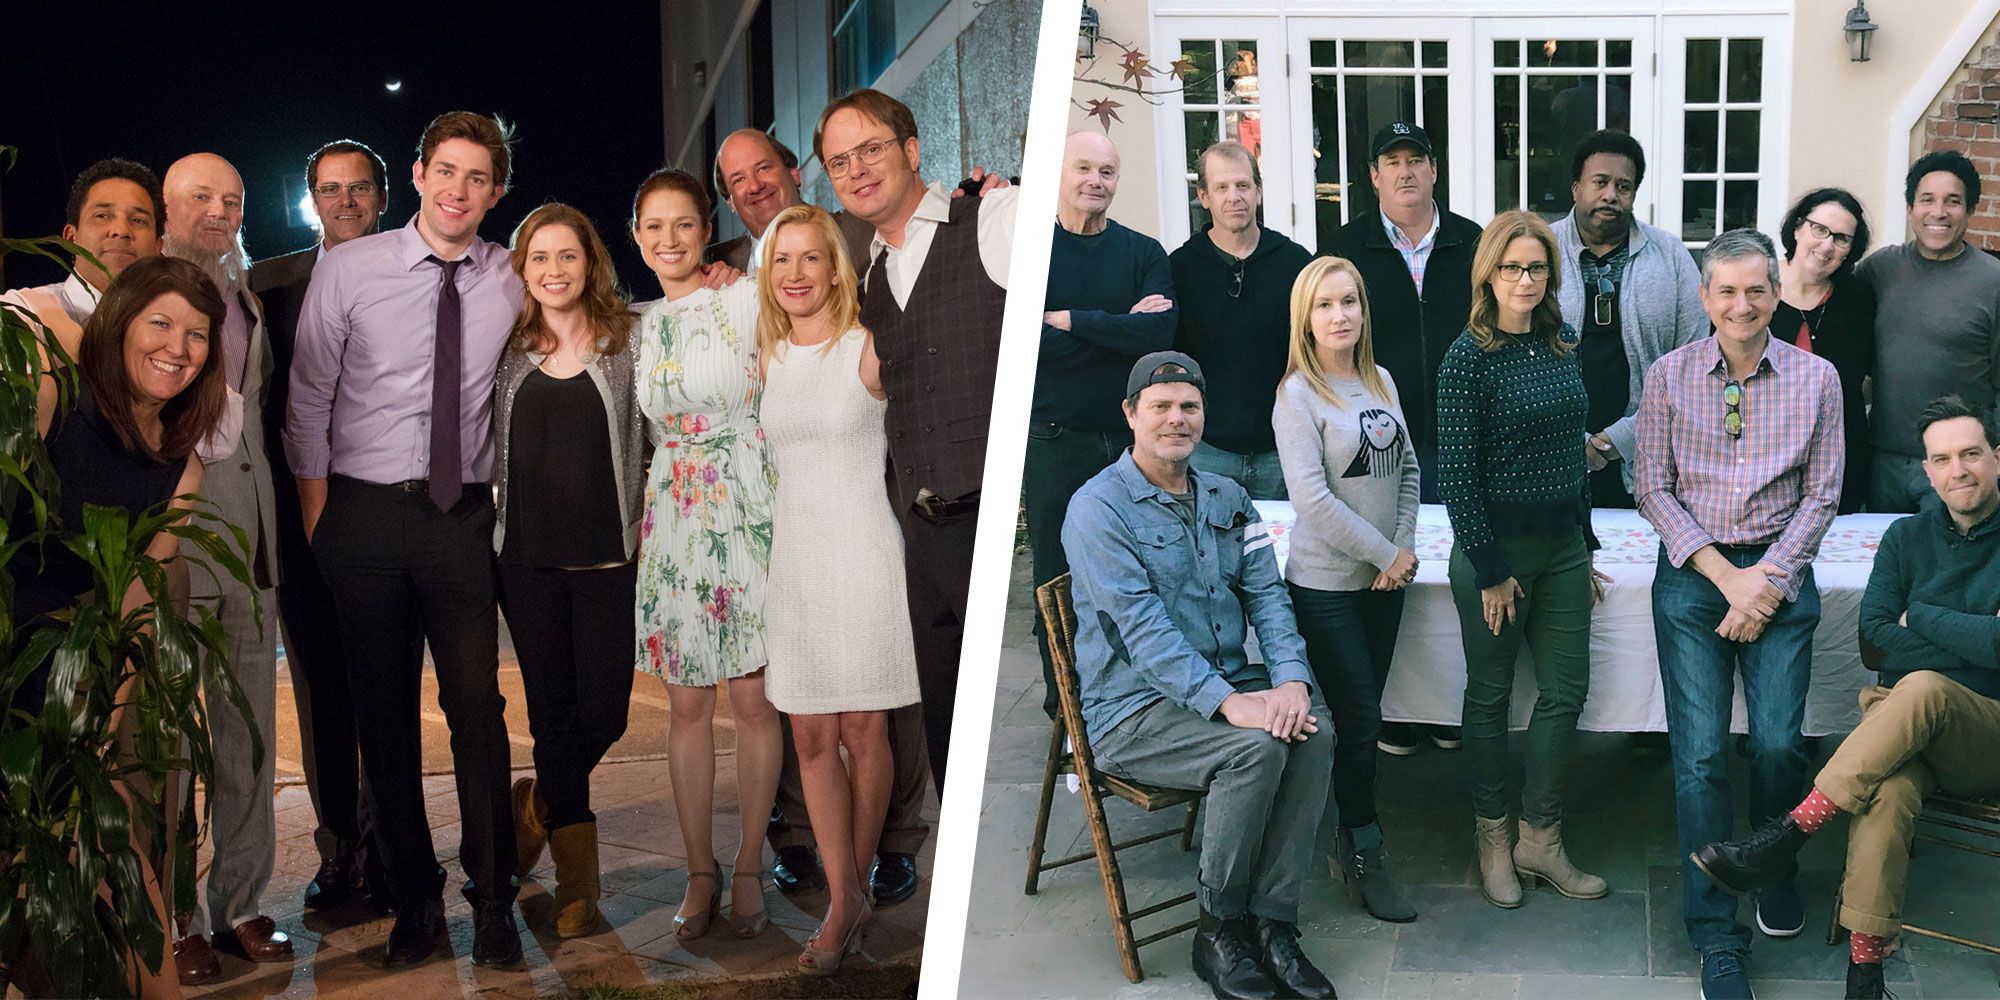 40 Photos of The Office Cast, Then and Now